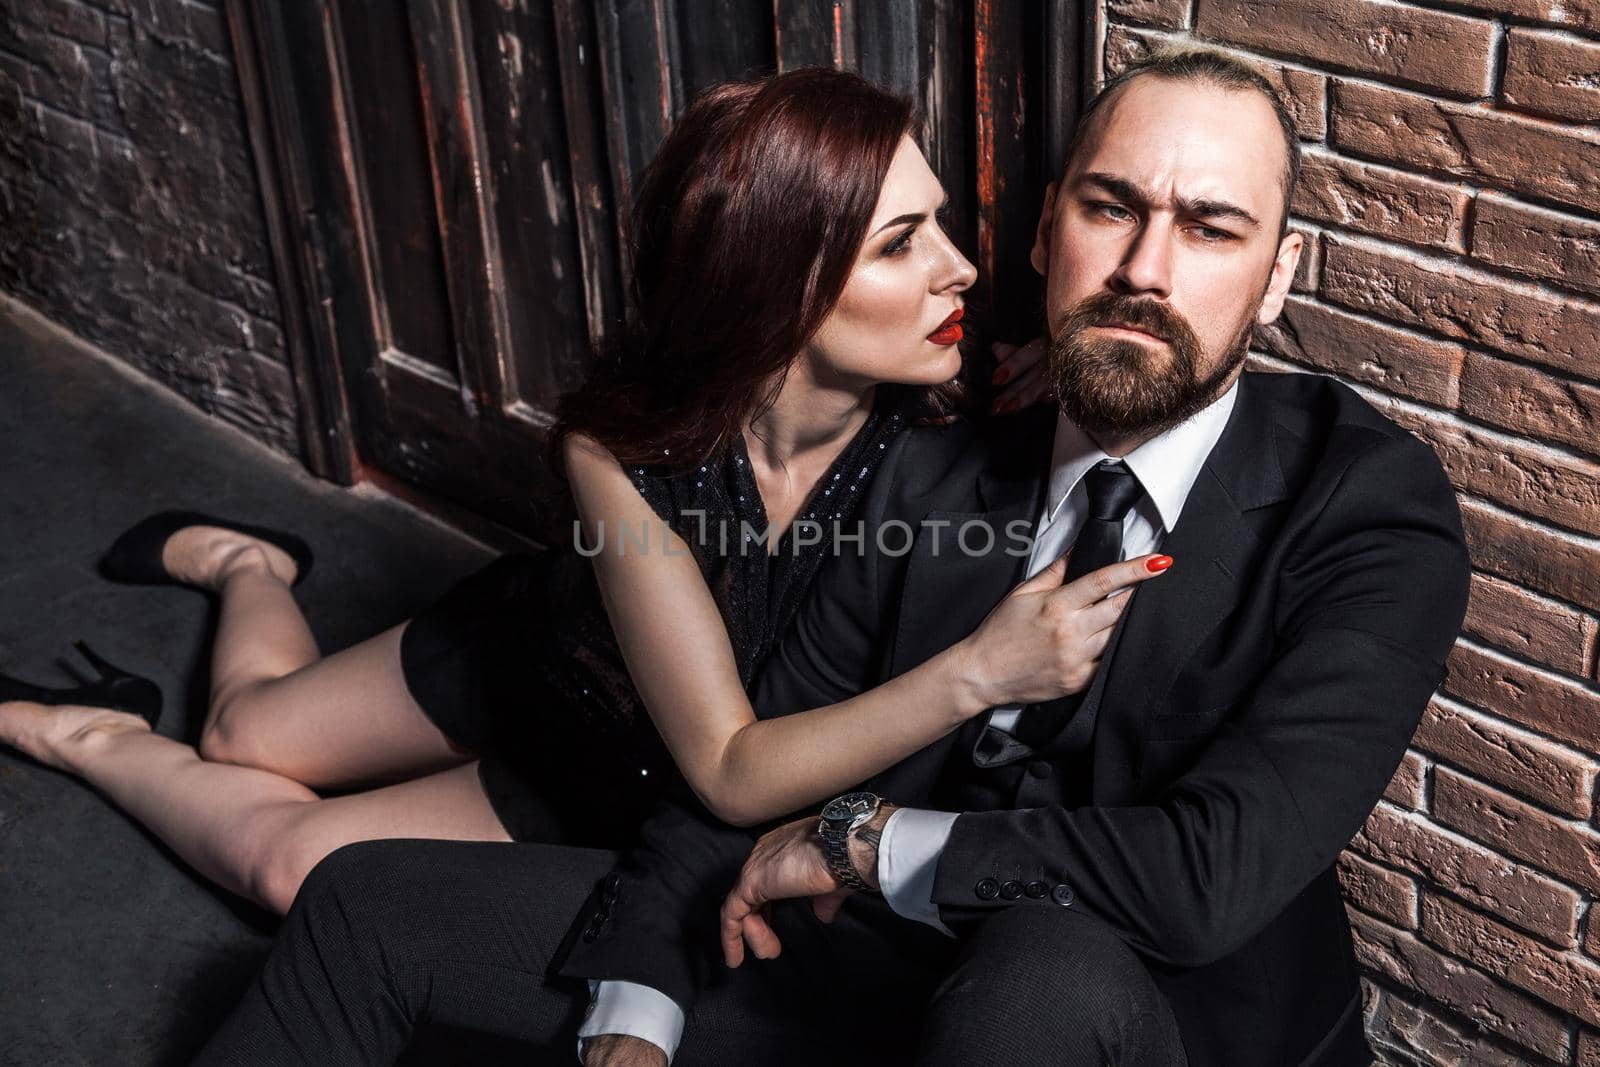 Man in suit and woman in black evening dress sitting on his lap. Foxy woman looks at him and wants to kiss by Khosro1